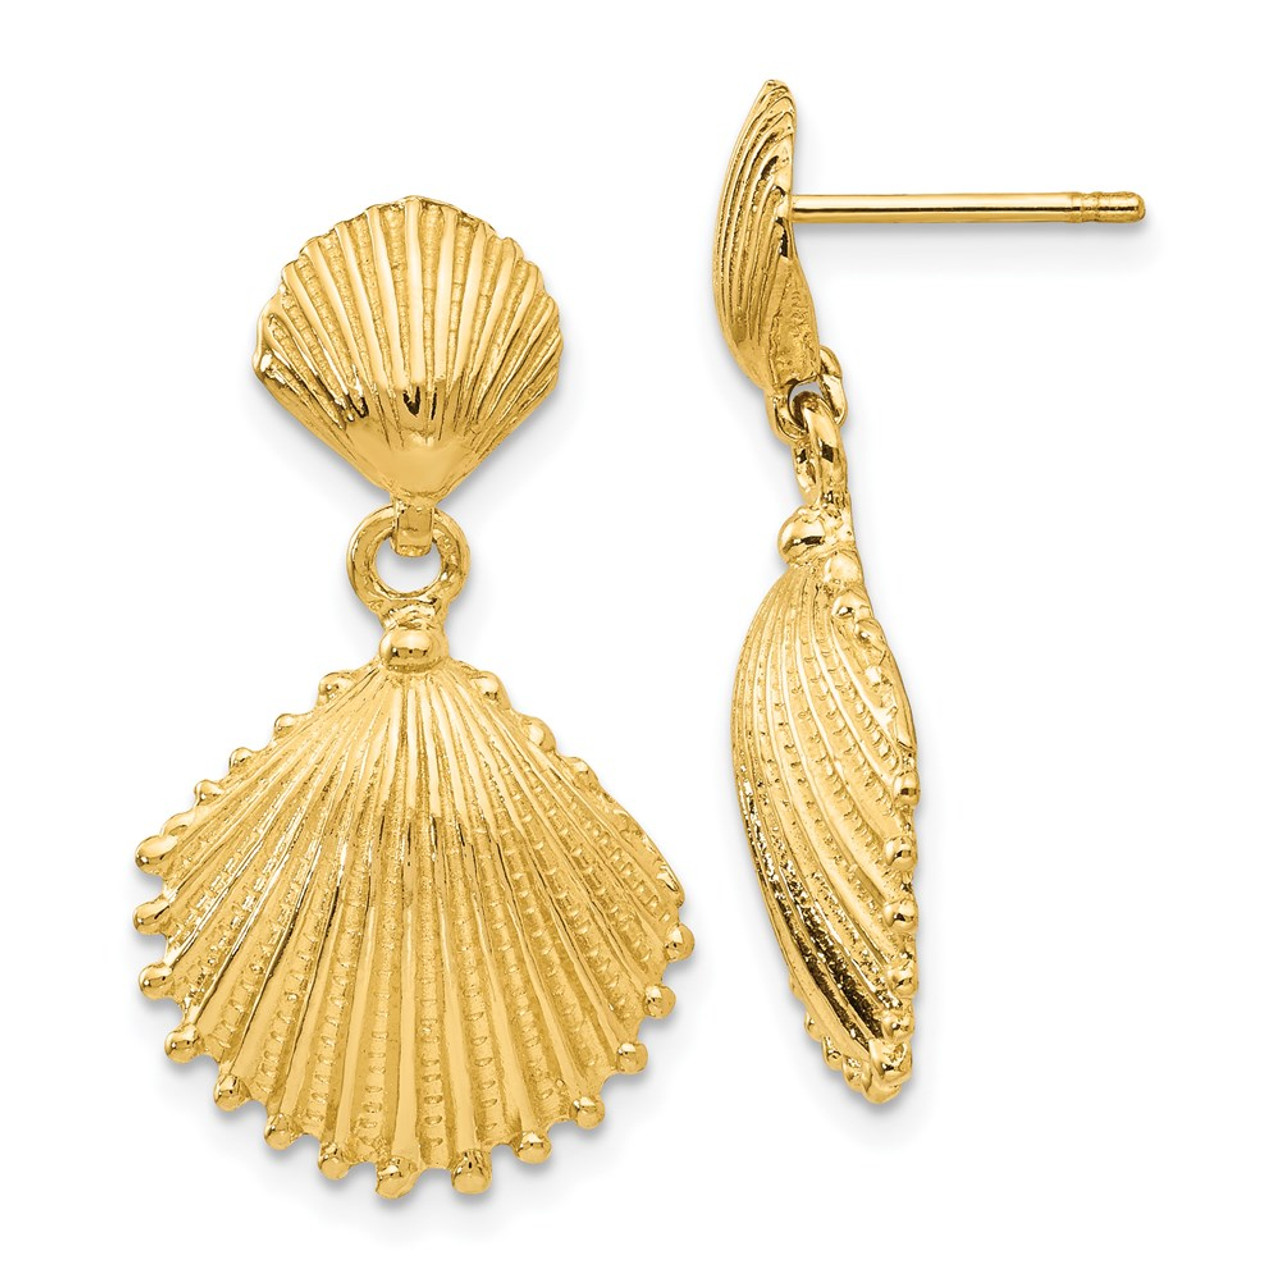 Gold Clam Shell Earrings | Citrus Reef